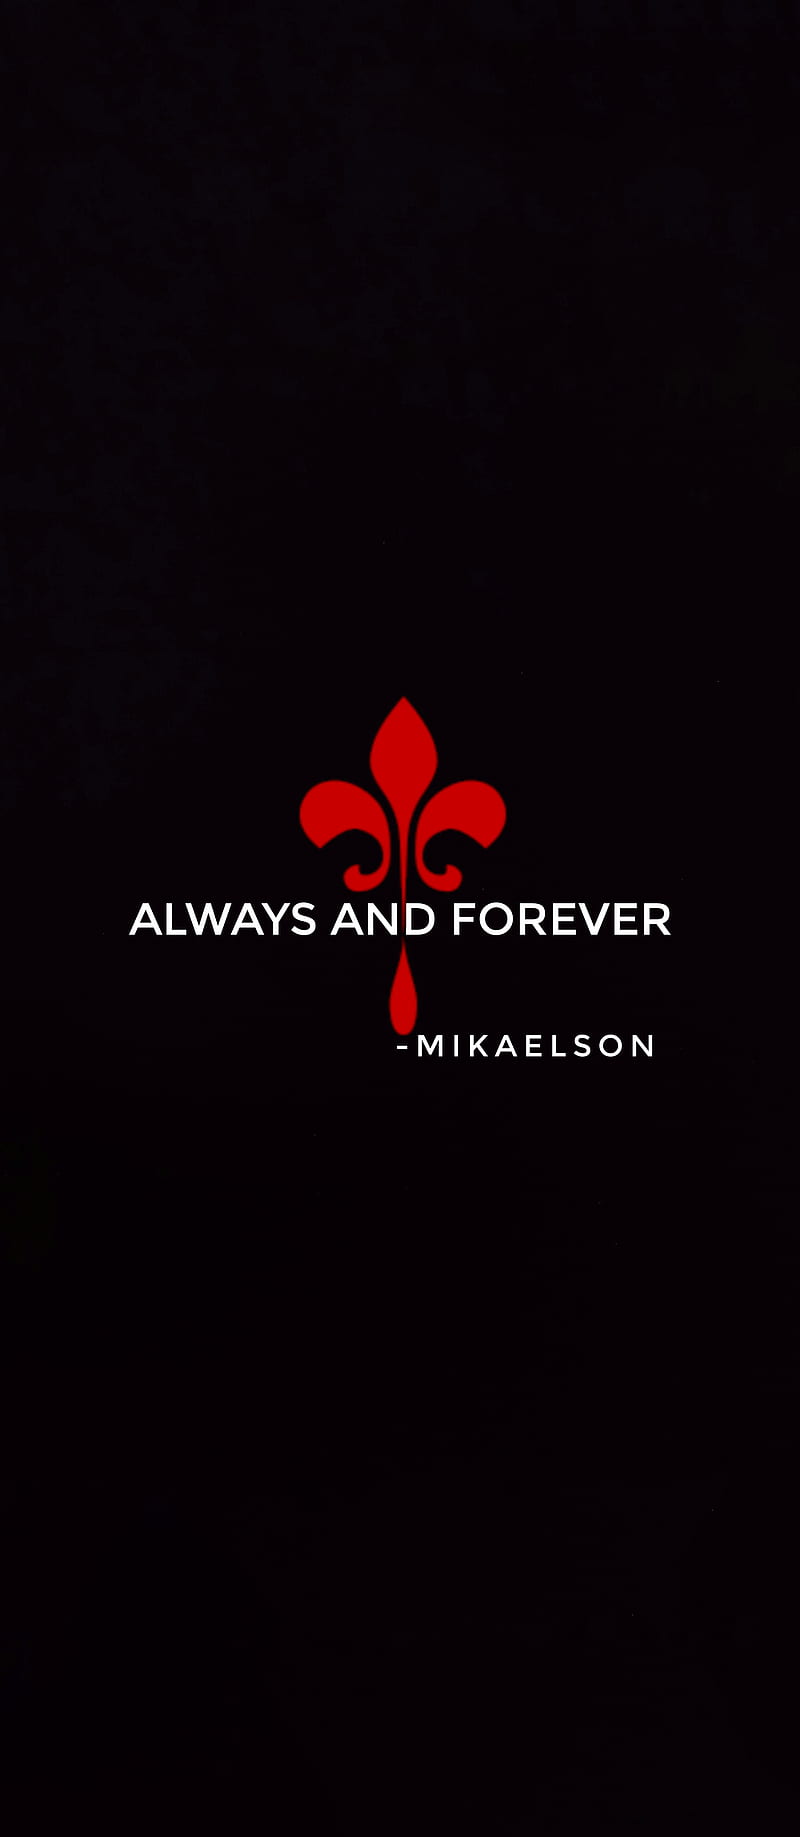 Always and forever, klaus, legacies, the mikaelson, the originals, vampire diaries, HD phone wallpaper